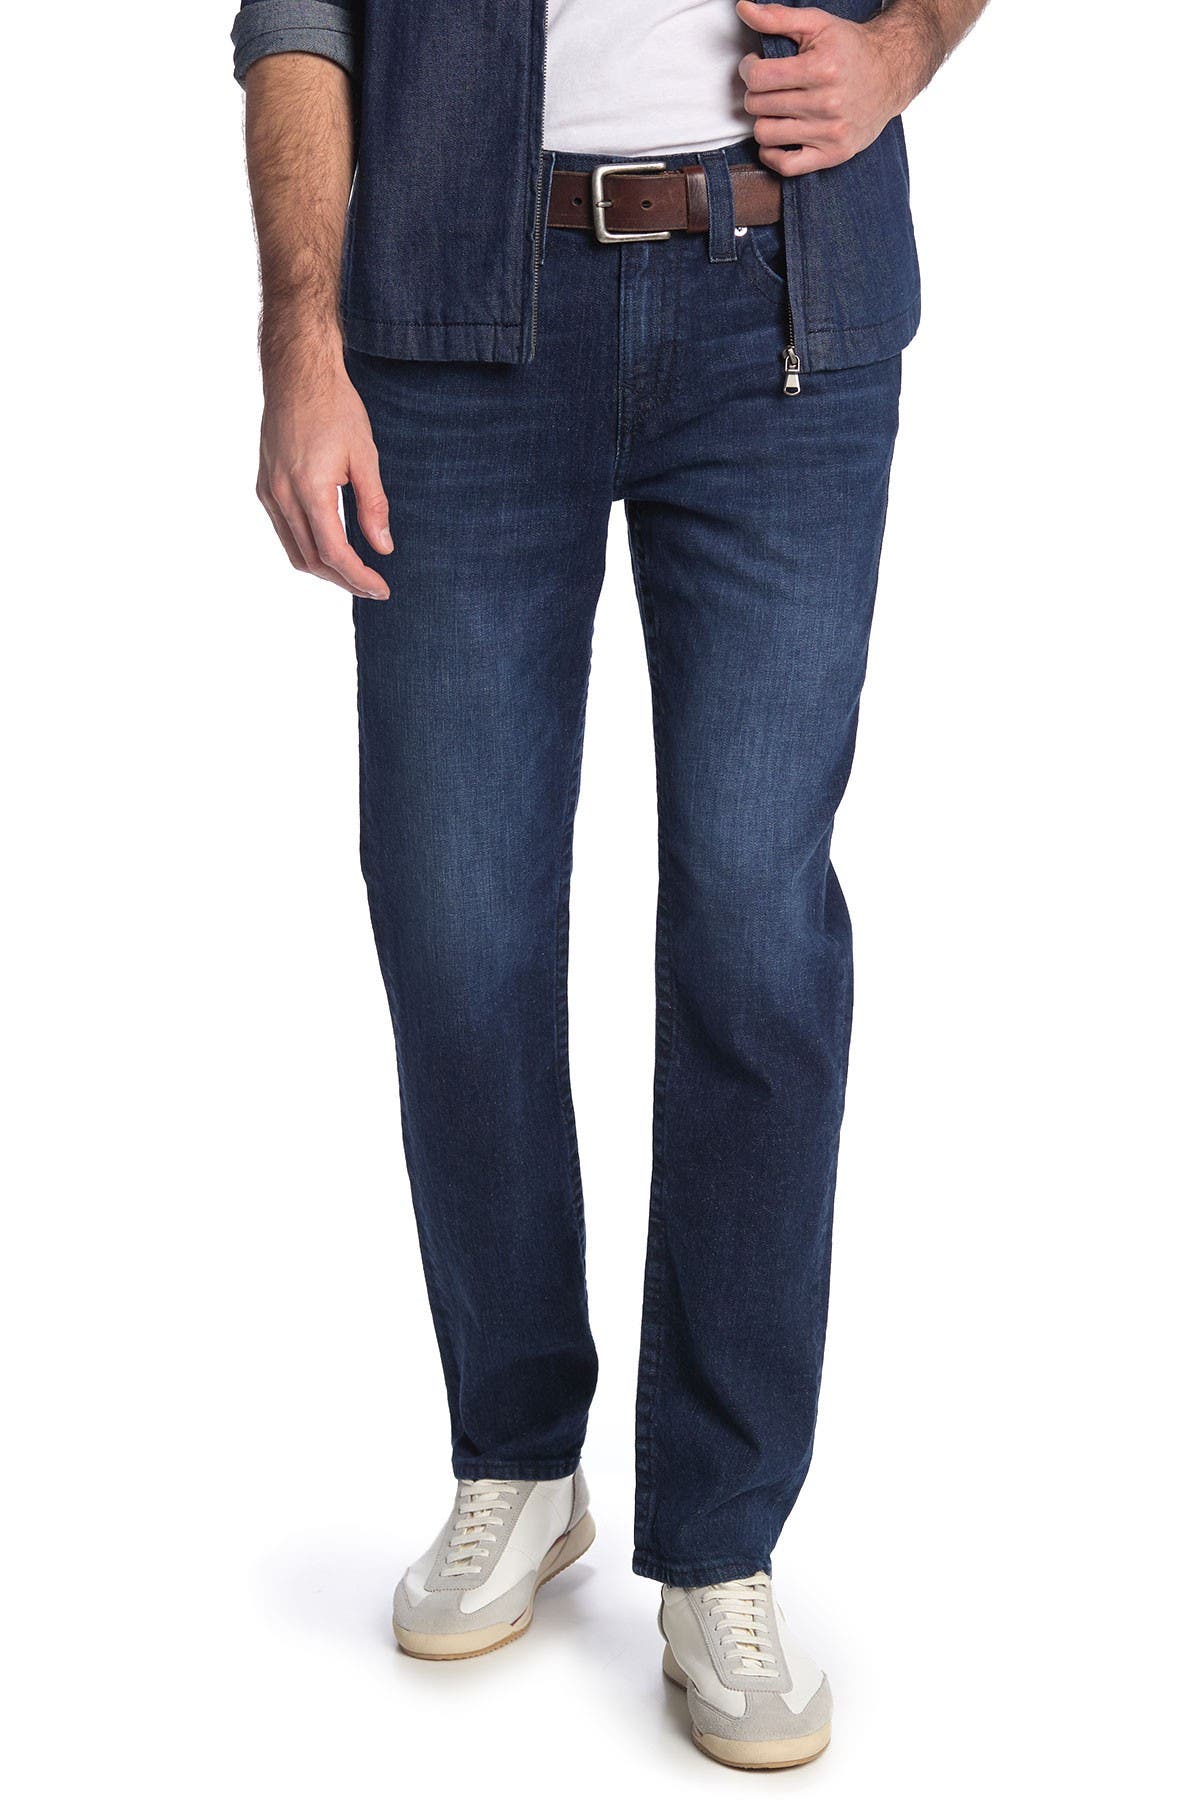 true religion relaxed slim geno jeans